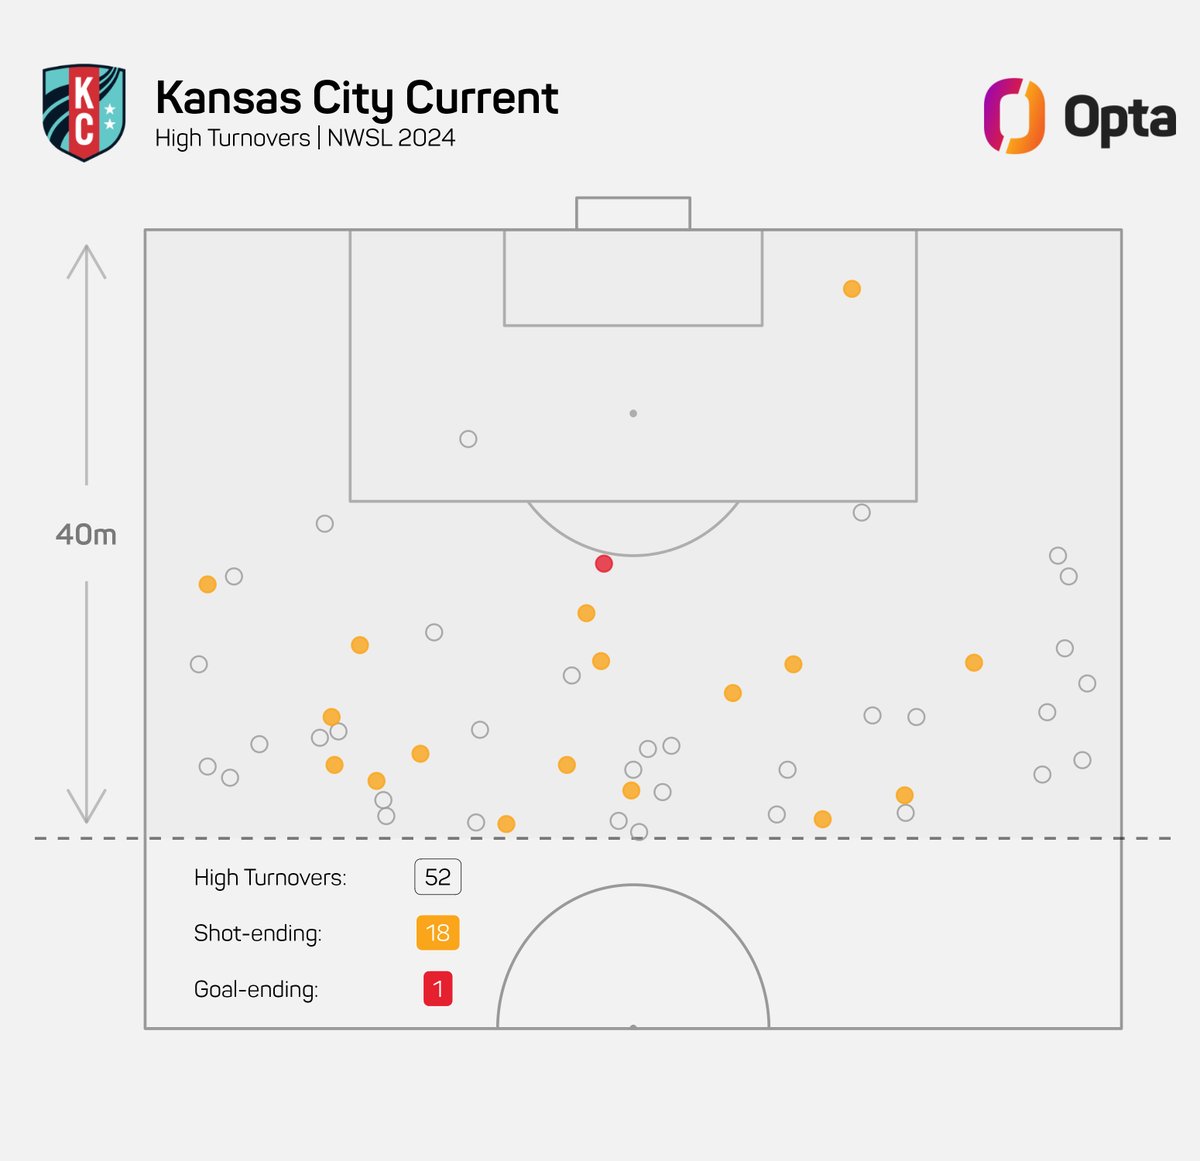 18 - @thekccurrent have forced 18 high turnovers leading to shots this season, five more than any other #NWSL team. Press.